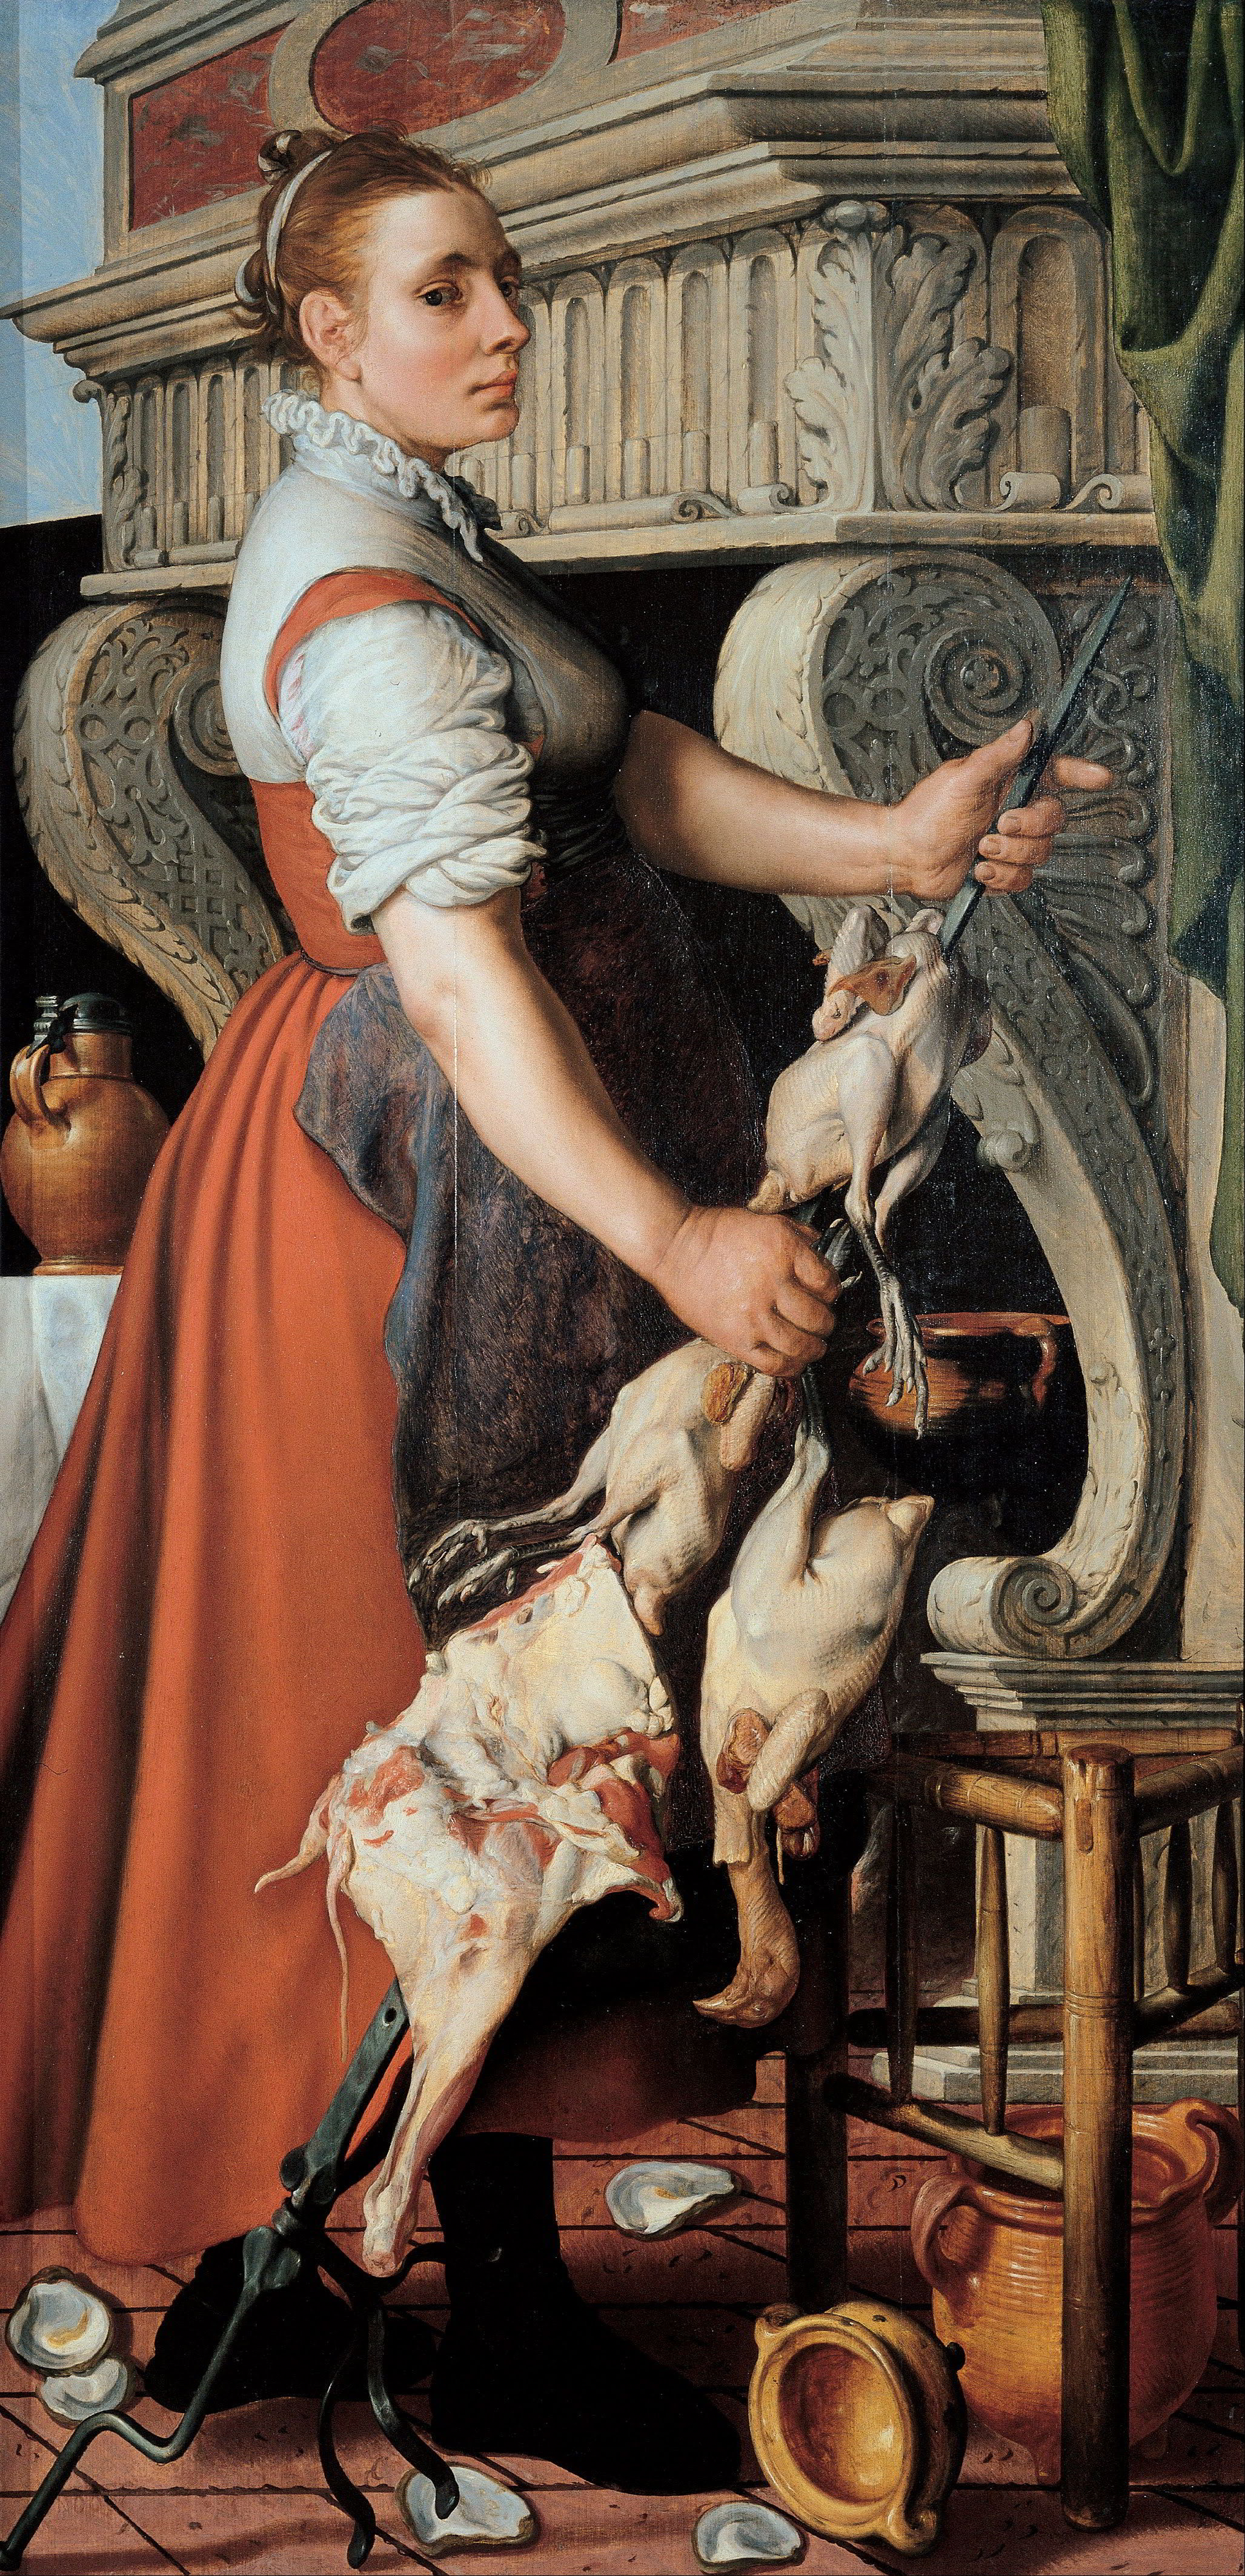 The Cook by Pieter Aertsen